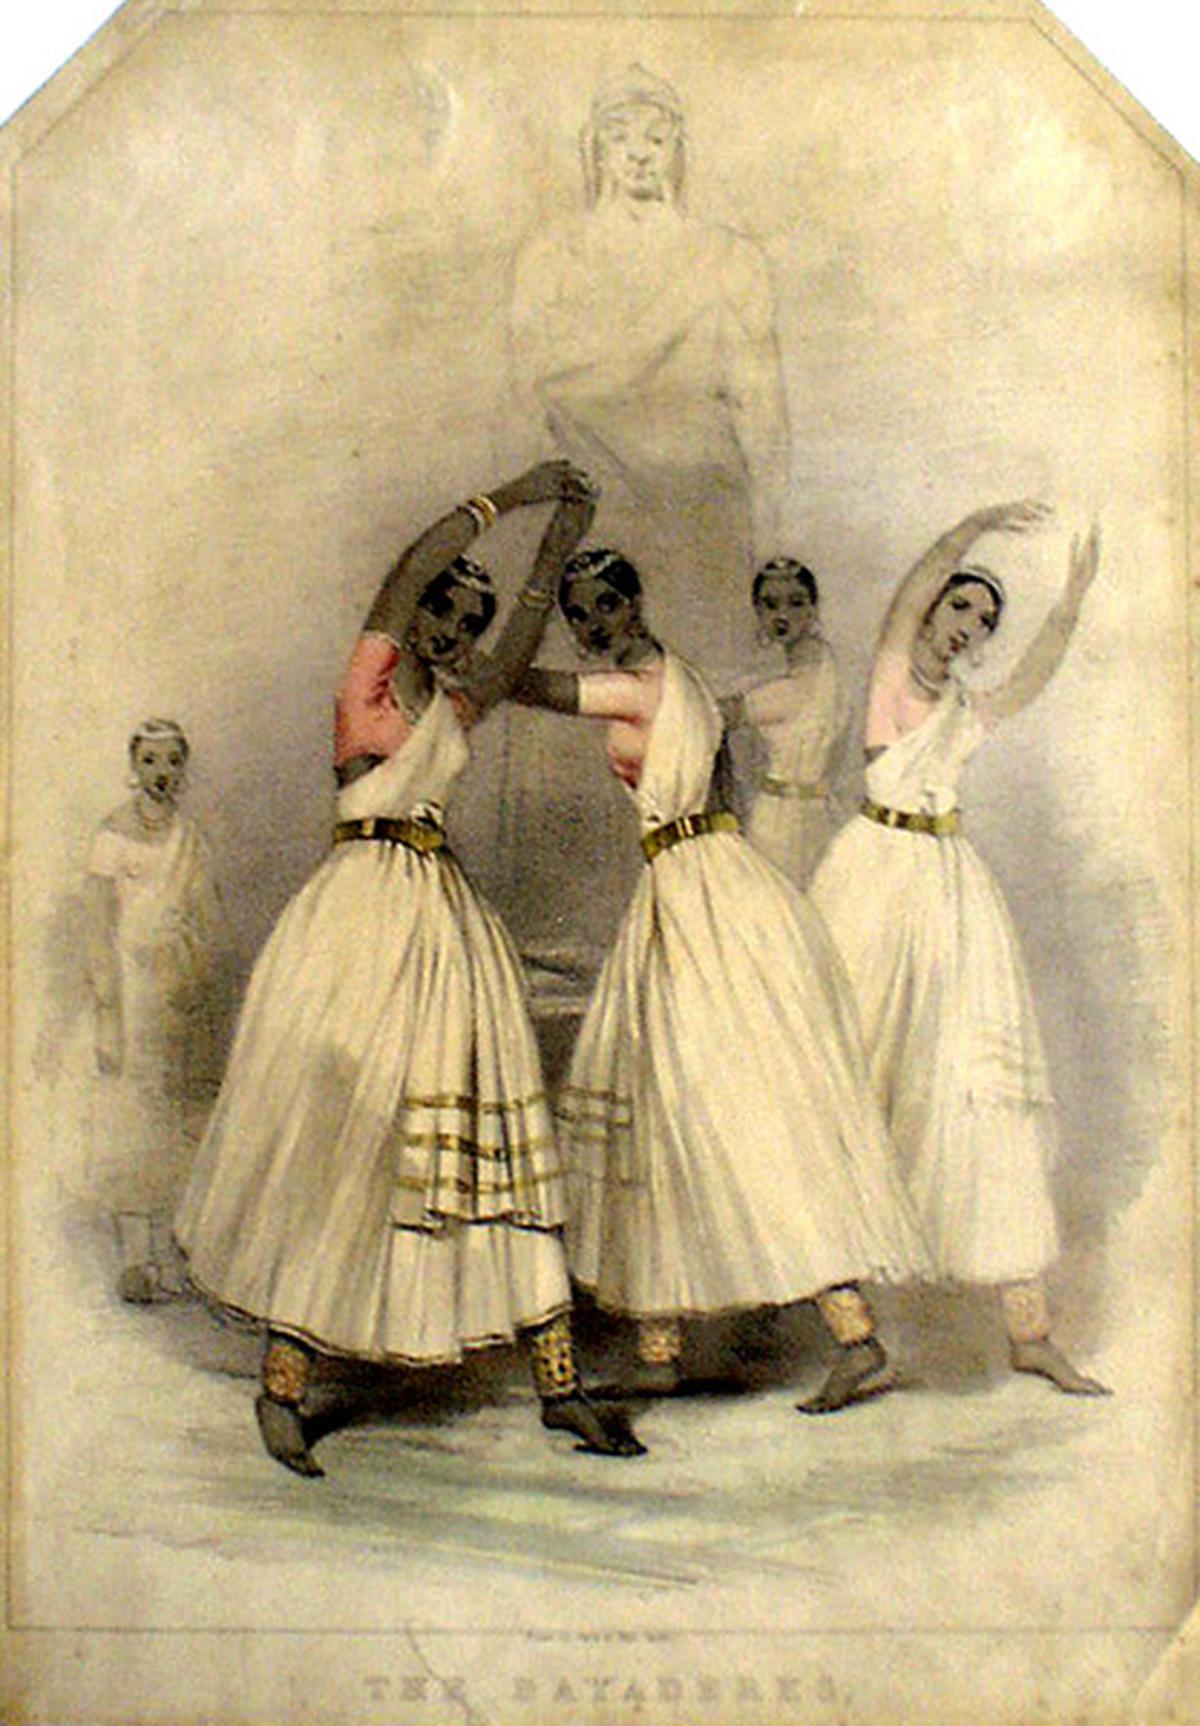 A lithograph shows dancers in a pose performing 'Malapo'